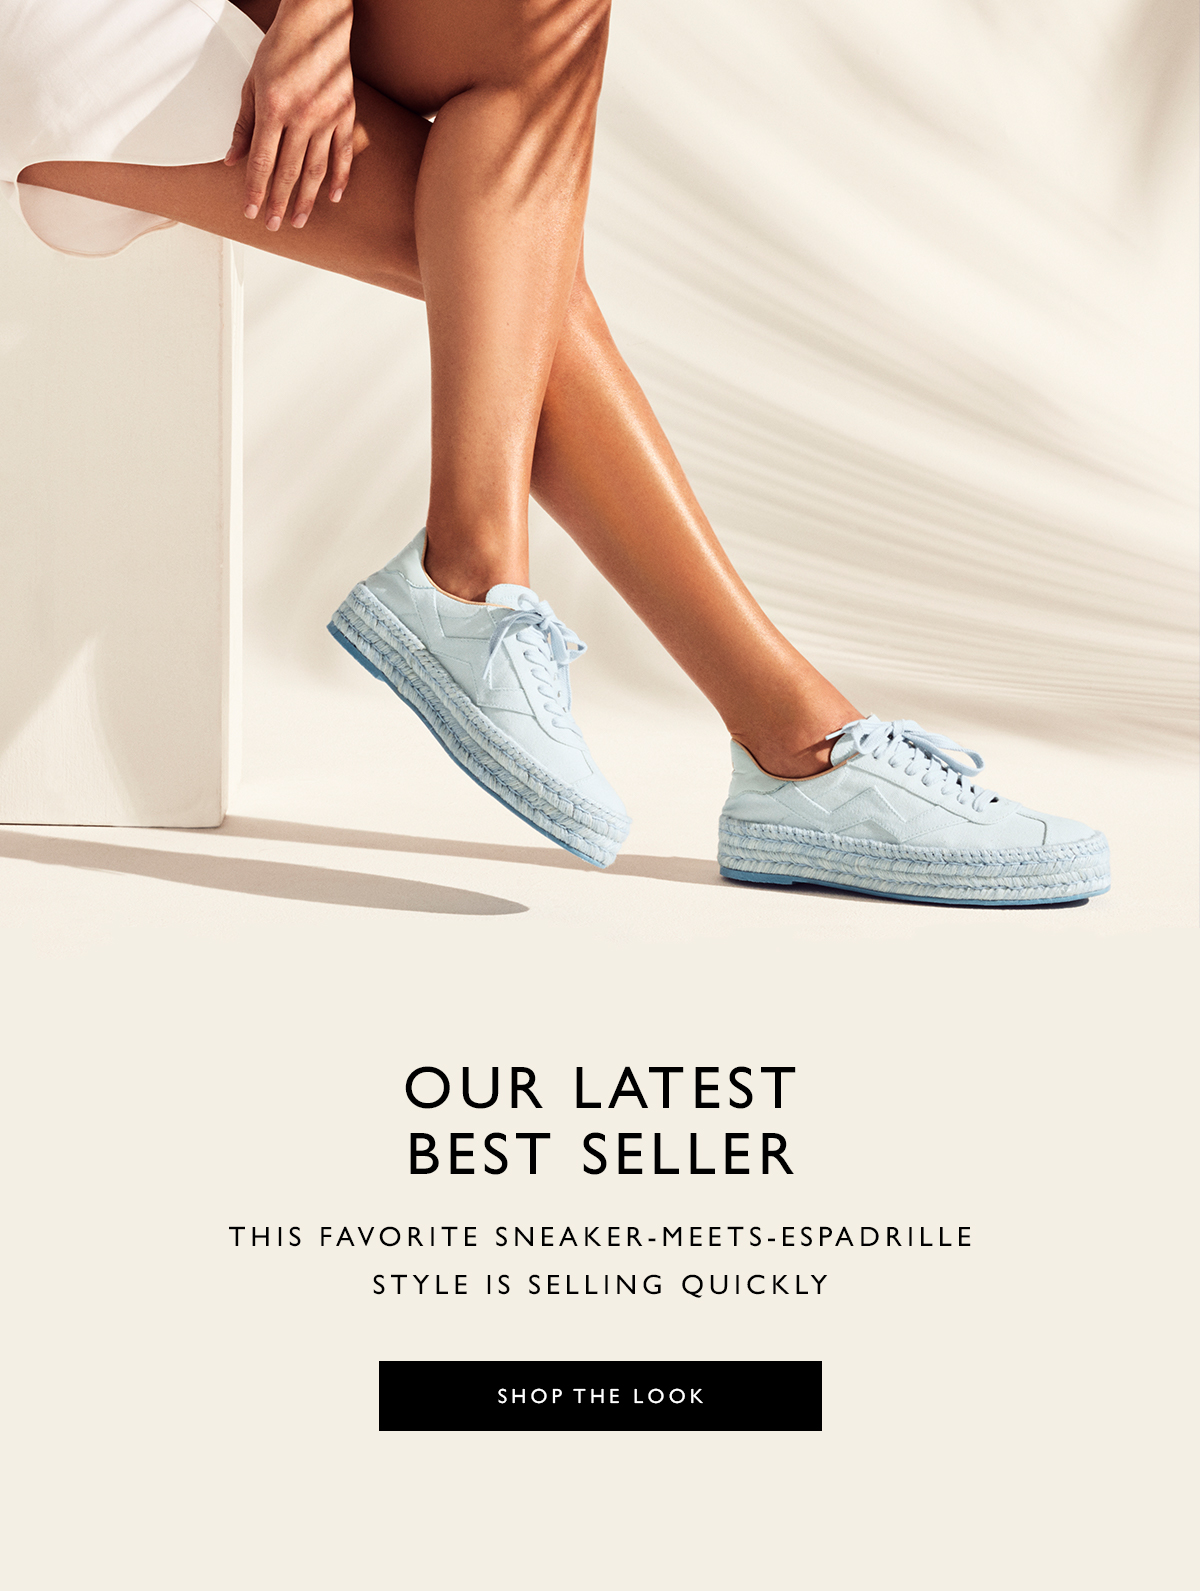  Our Latest Best Seller. This favorite sneaker-meets-espadrille style is selling quickly. SHOP THE LOOK